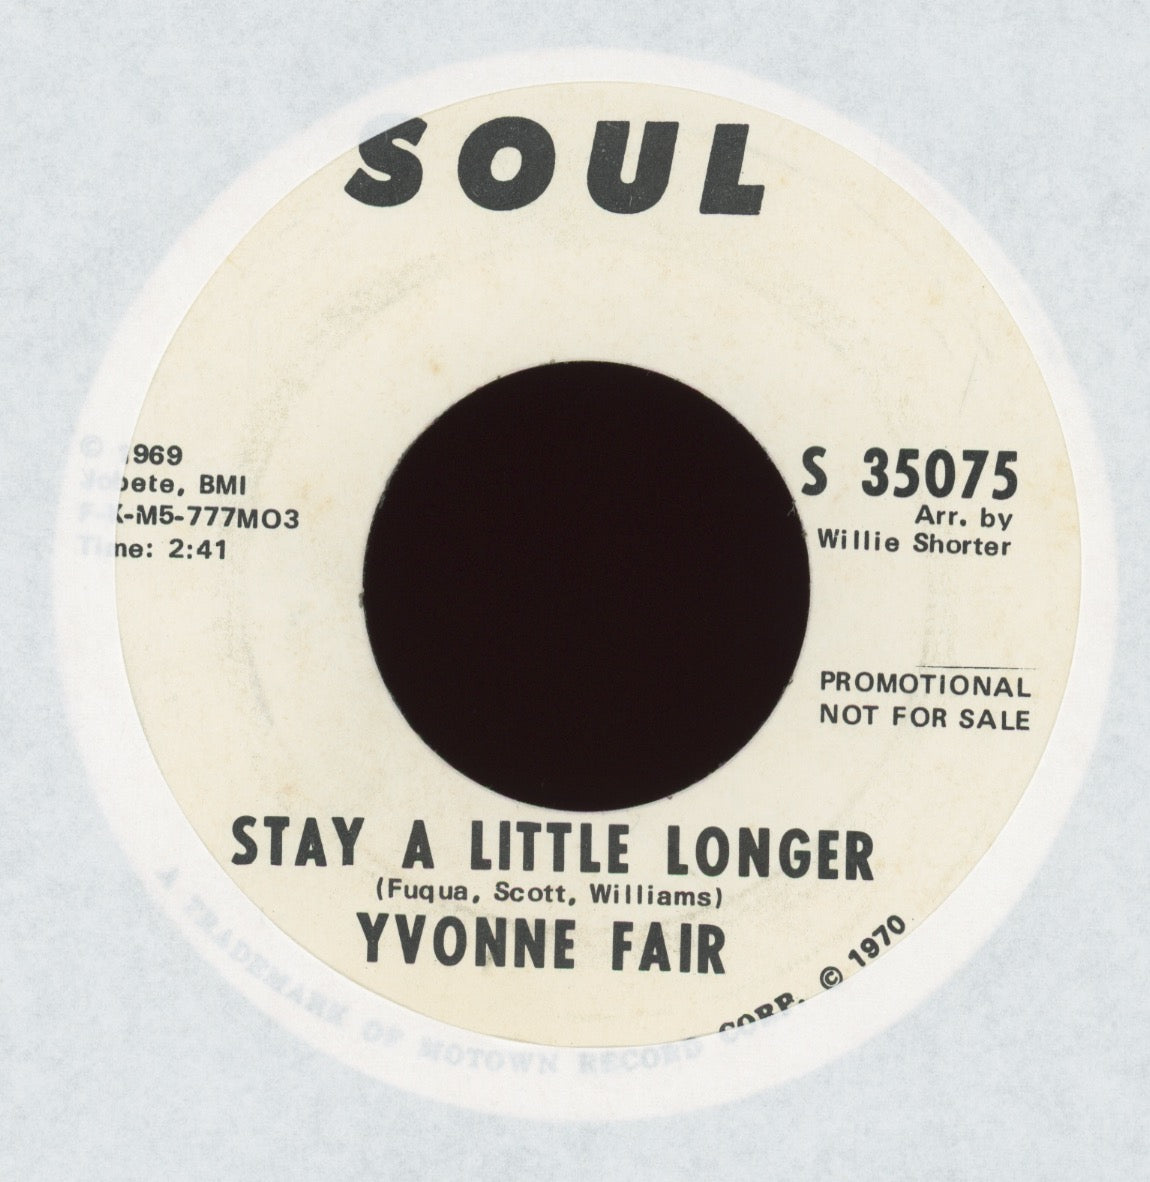 Yvonne Fair - We Should Never Be Lonely My Love on SOUL Promo Soul 45